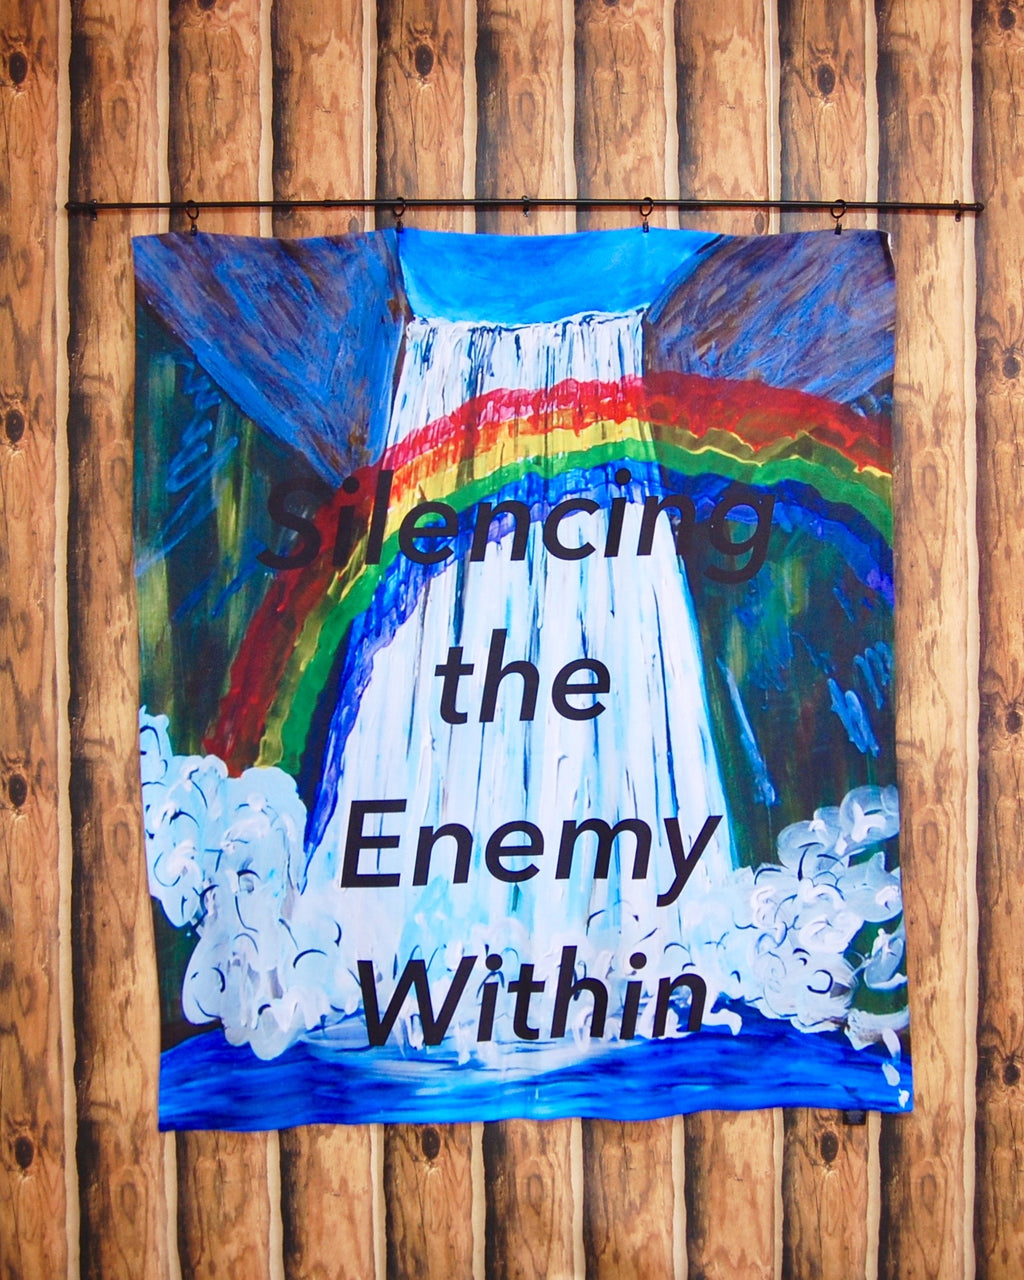 Kristin Hough, Silencing the Enemy Within